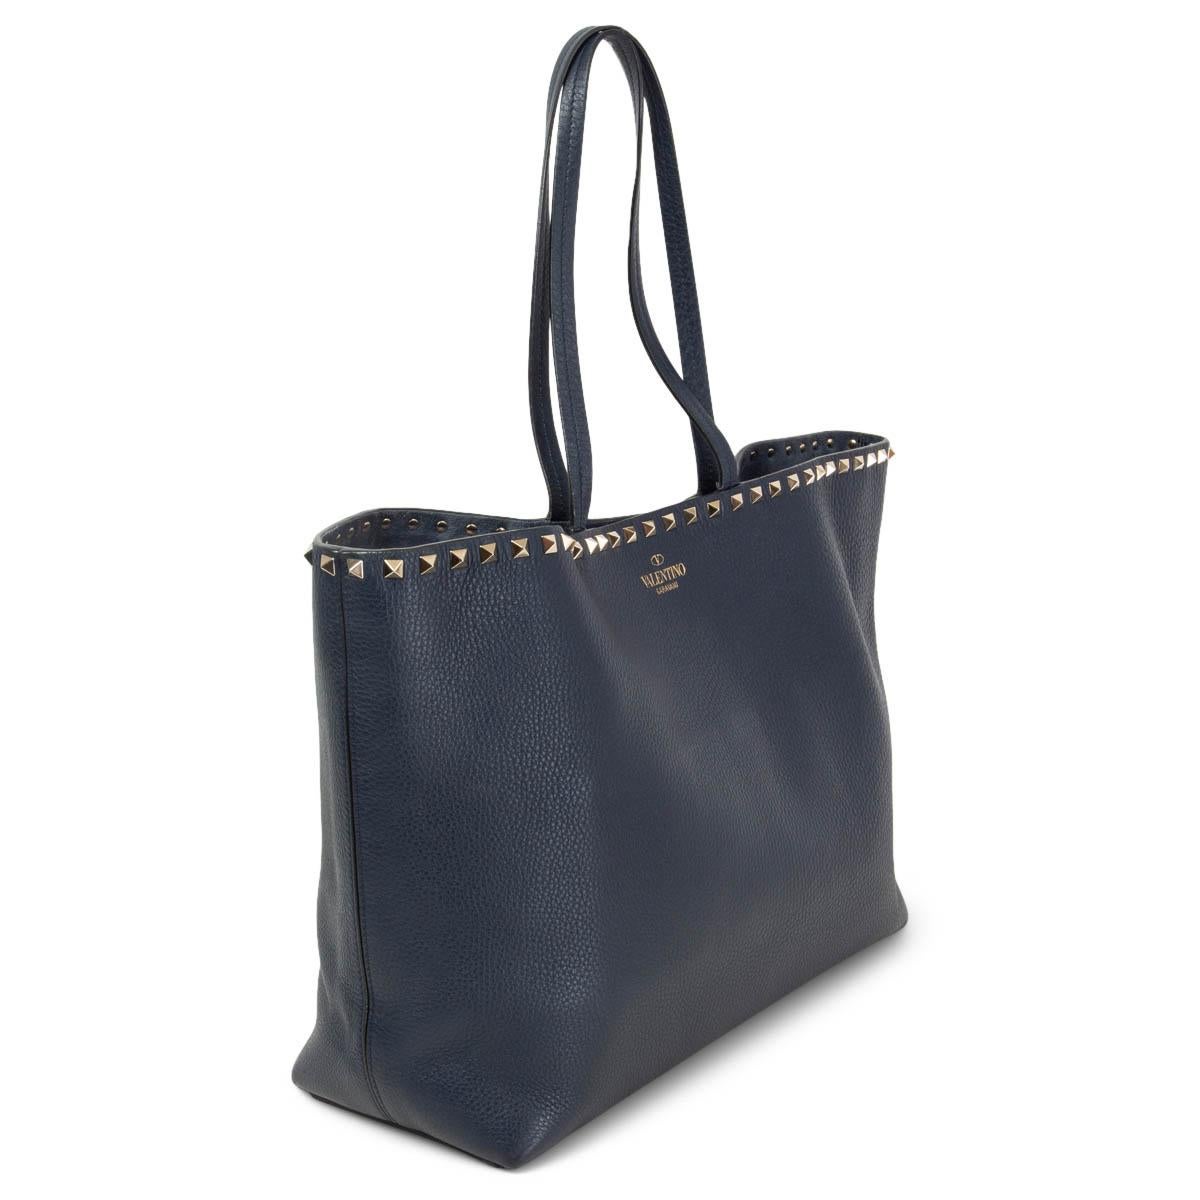 100% authentic Valentino Garavani Rockstud tote bag in dark blue grainy calfskin leather. Top edge adorned with platinum studs. Opens with a magnetic closure on top and is unlined. Flat zipper pocket and double slip pocket inside. Has been carried